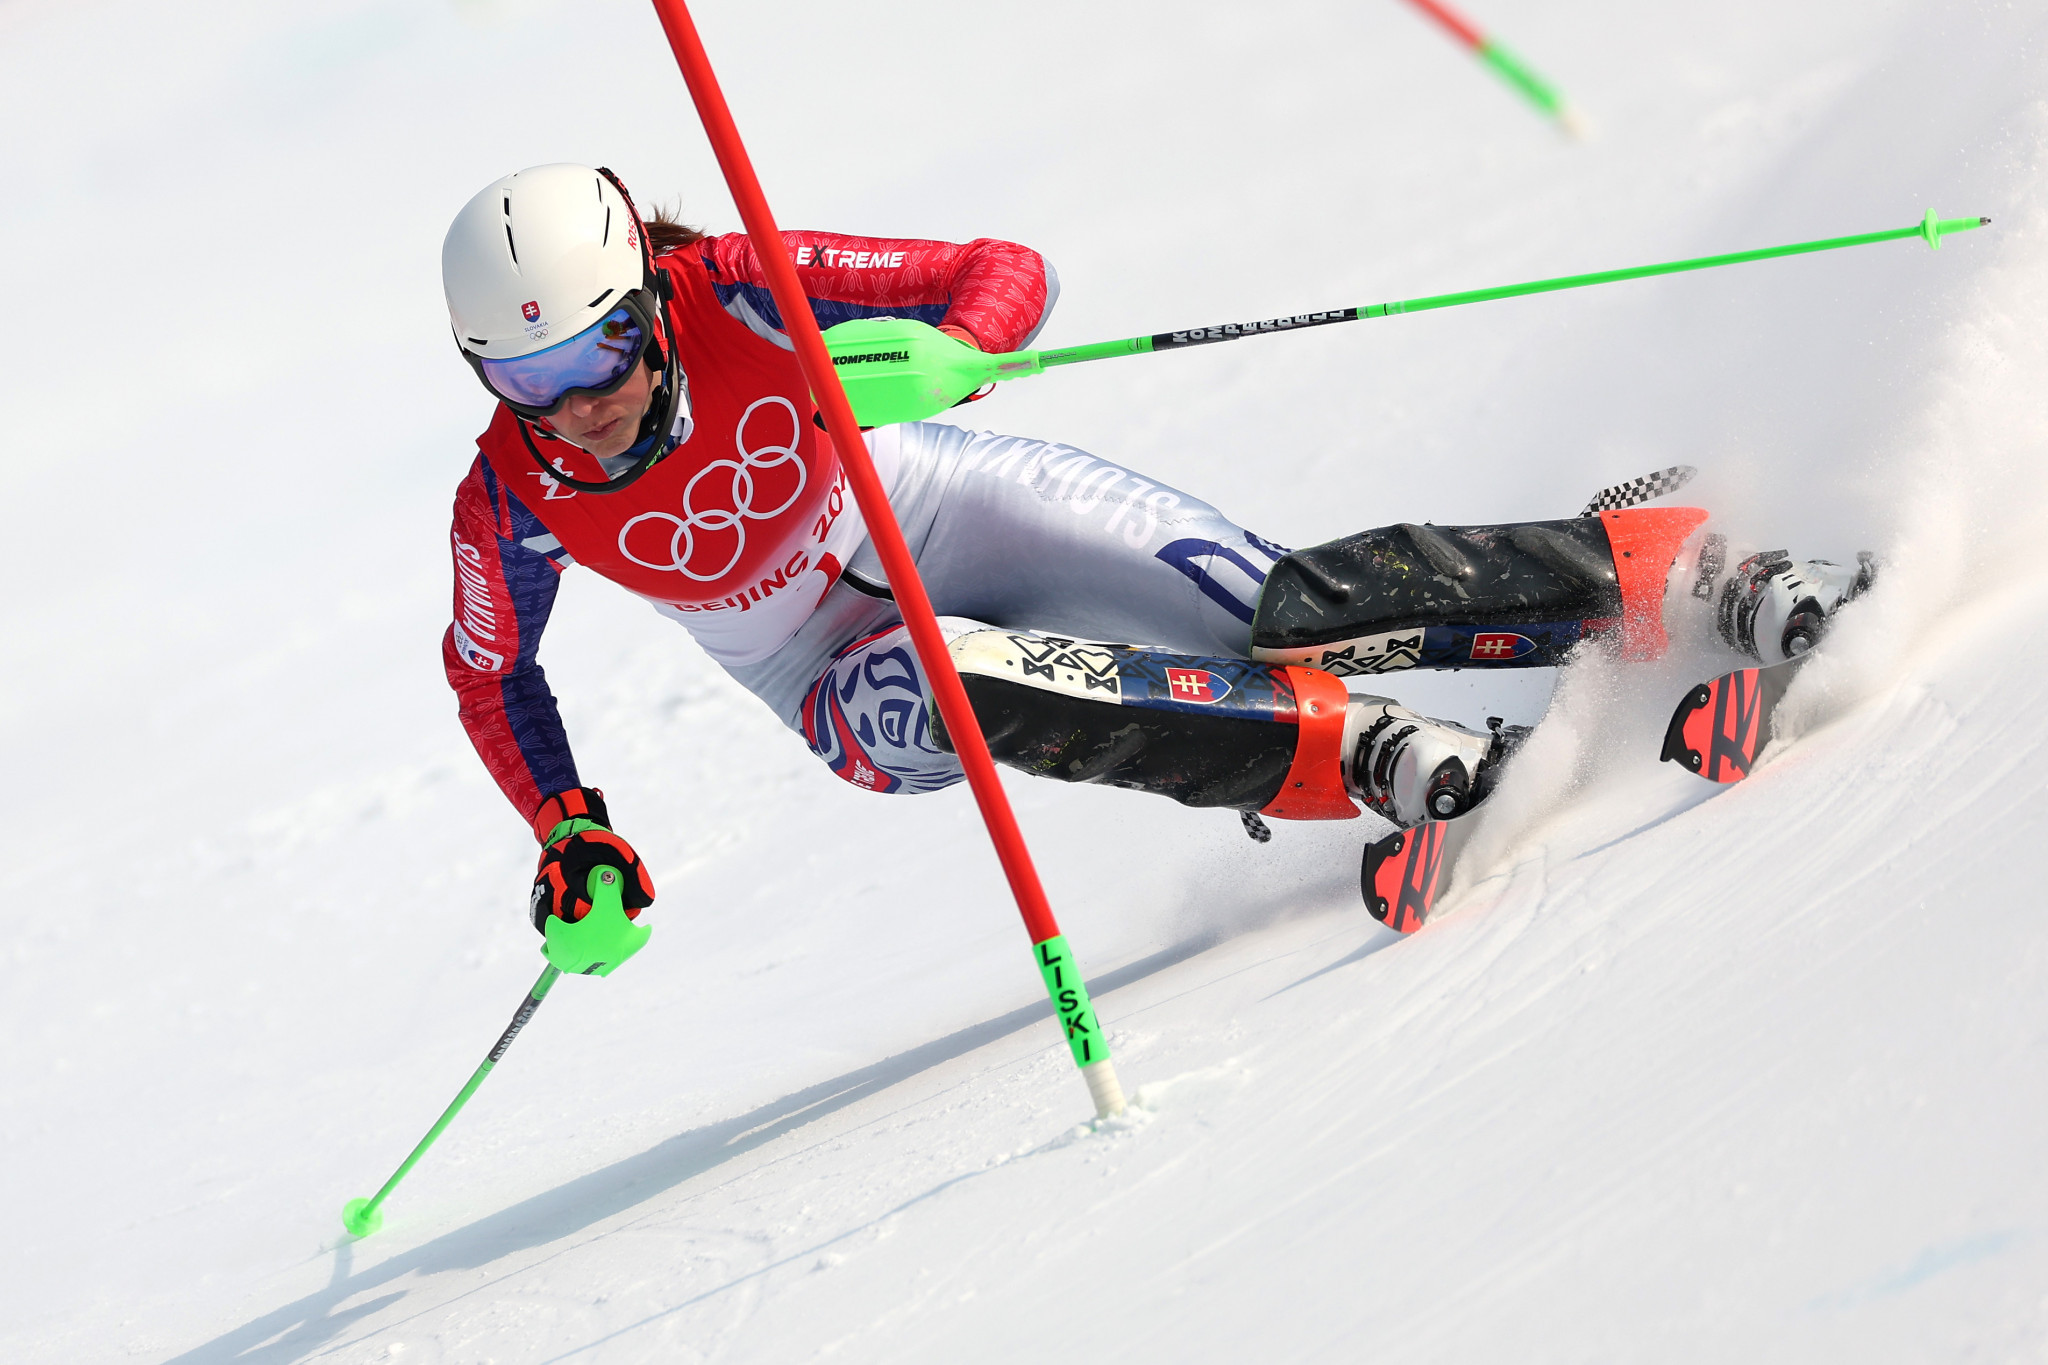 There was American disappointment in the women's slalom, however, as Mikaela Shiffrin missed a gate, making Slovakian Petra Vlhová's route to the gold medal more straightforward ©Getty Images